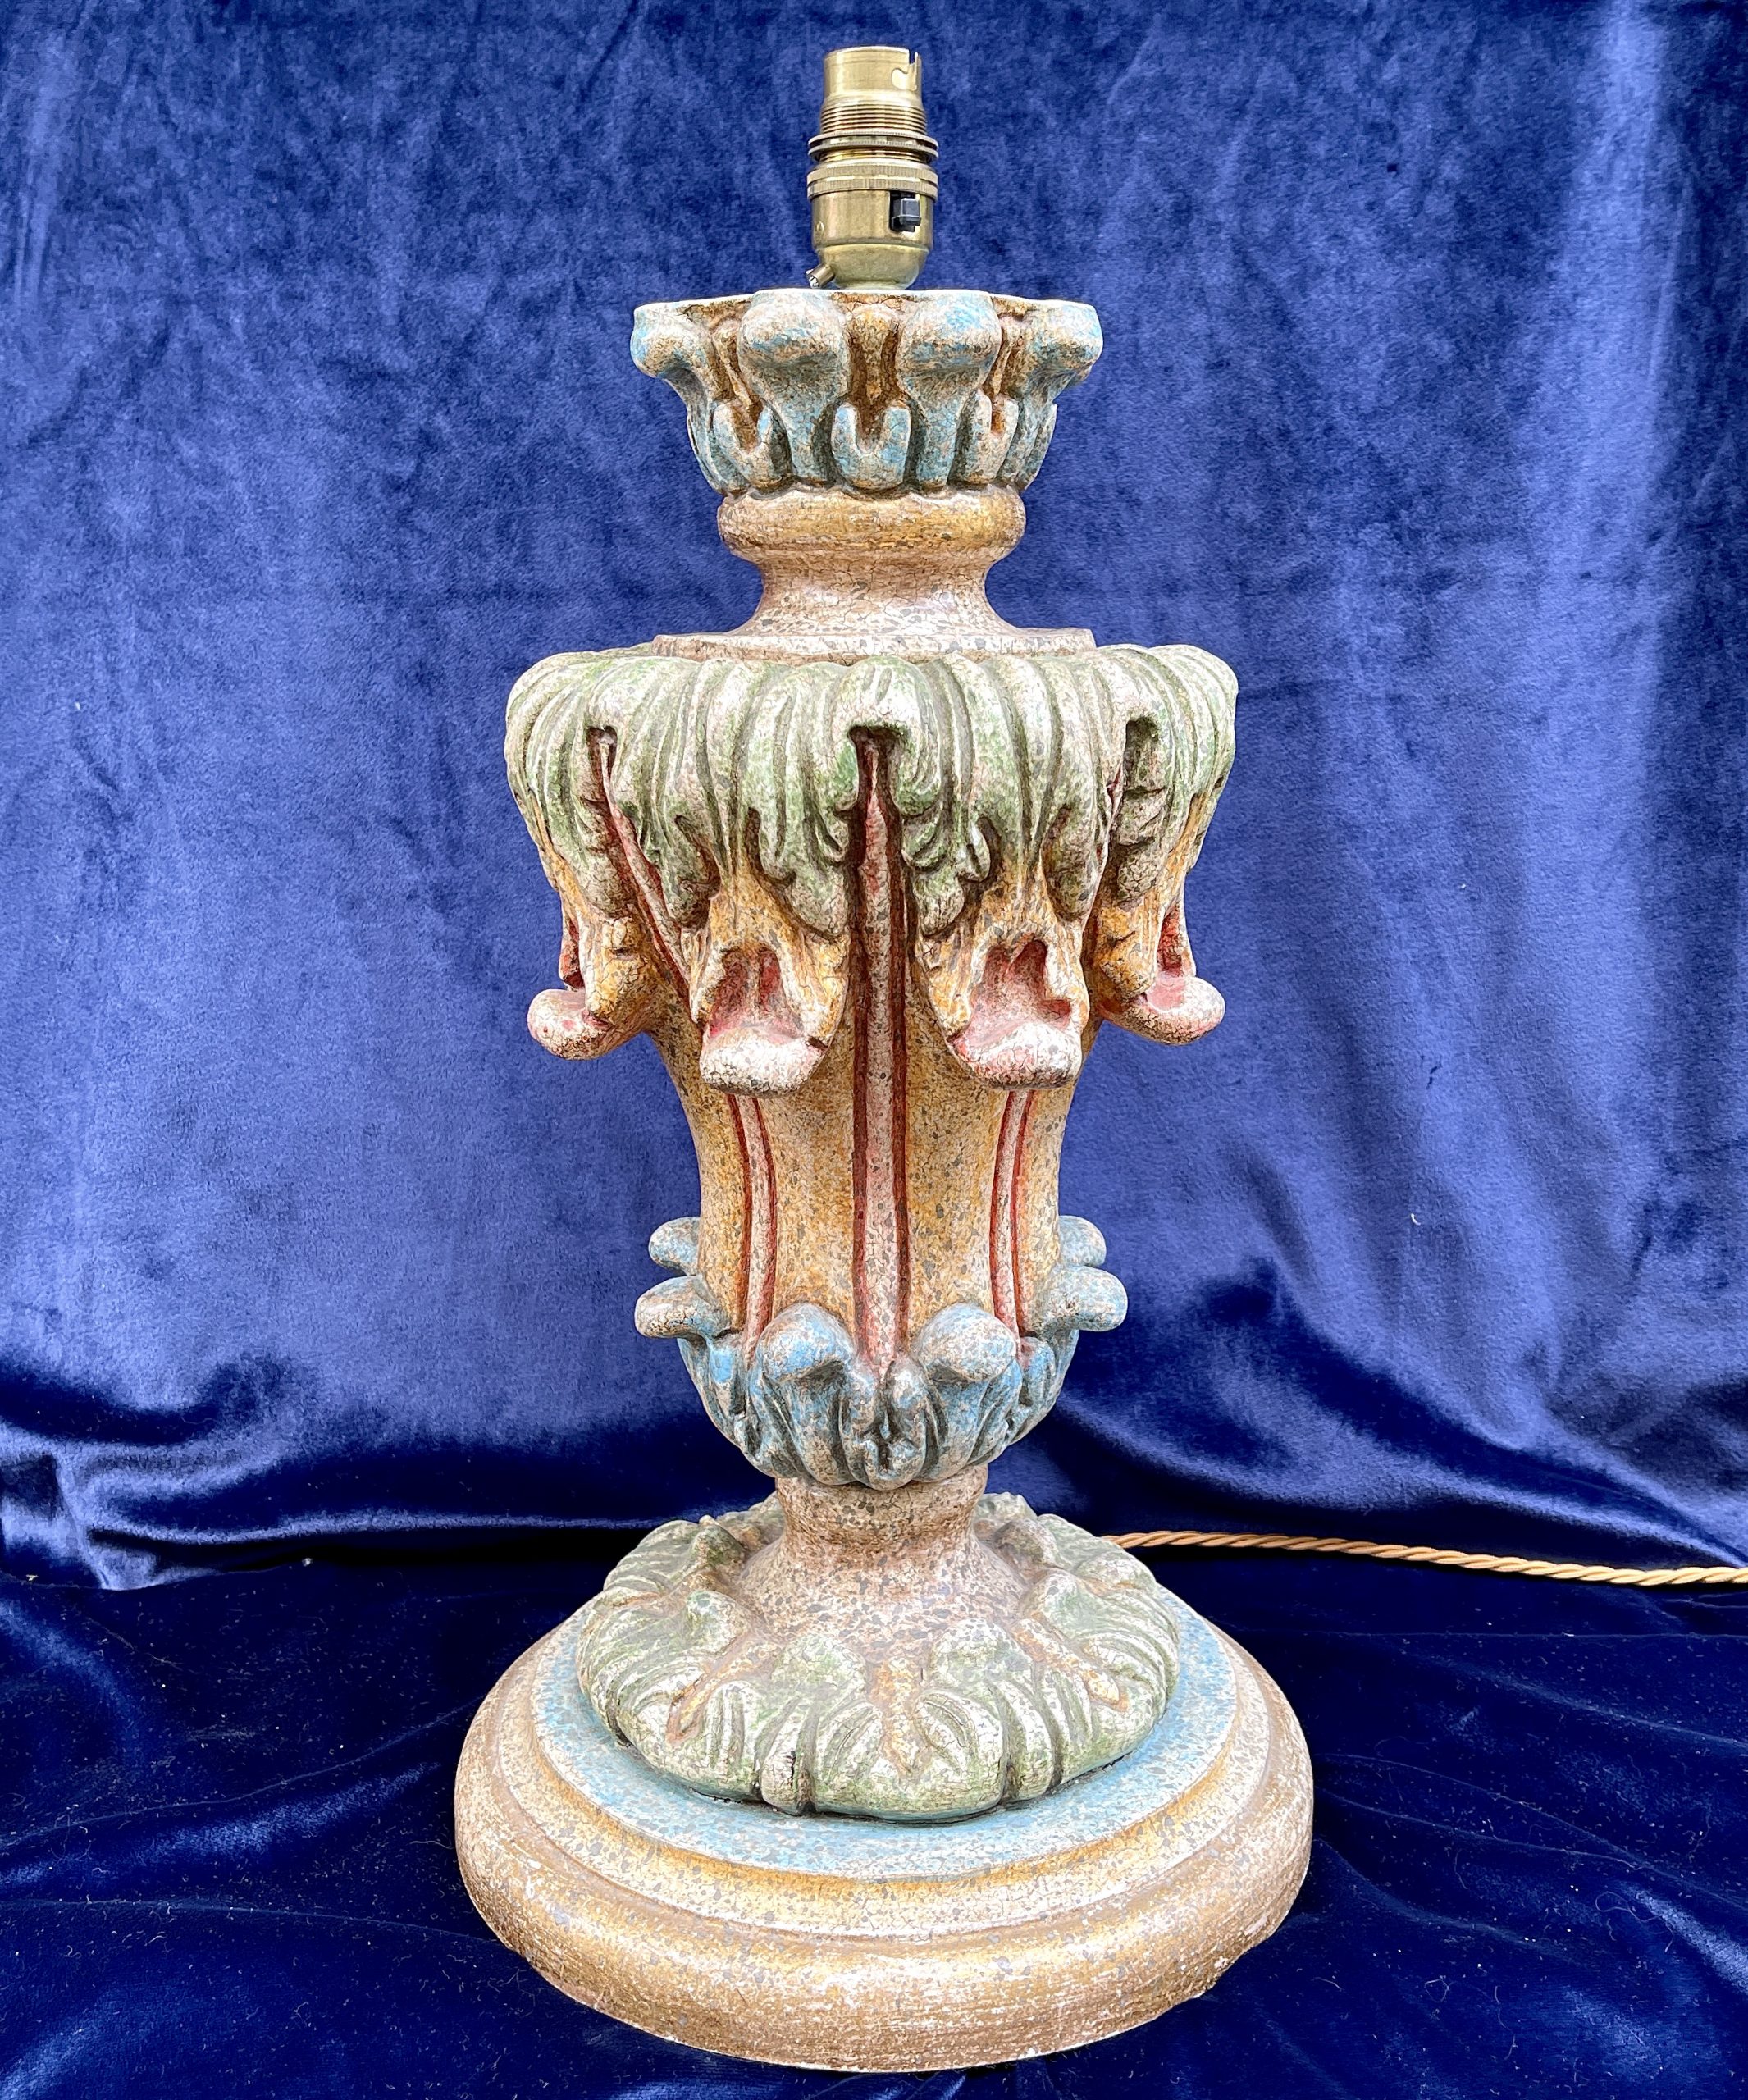 Chequers　An　Style　Italian　Lamp　Antiques　Baroque　Polychrome